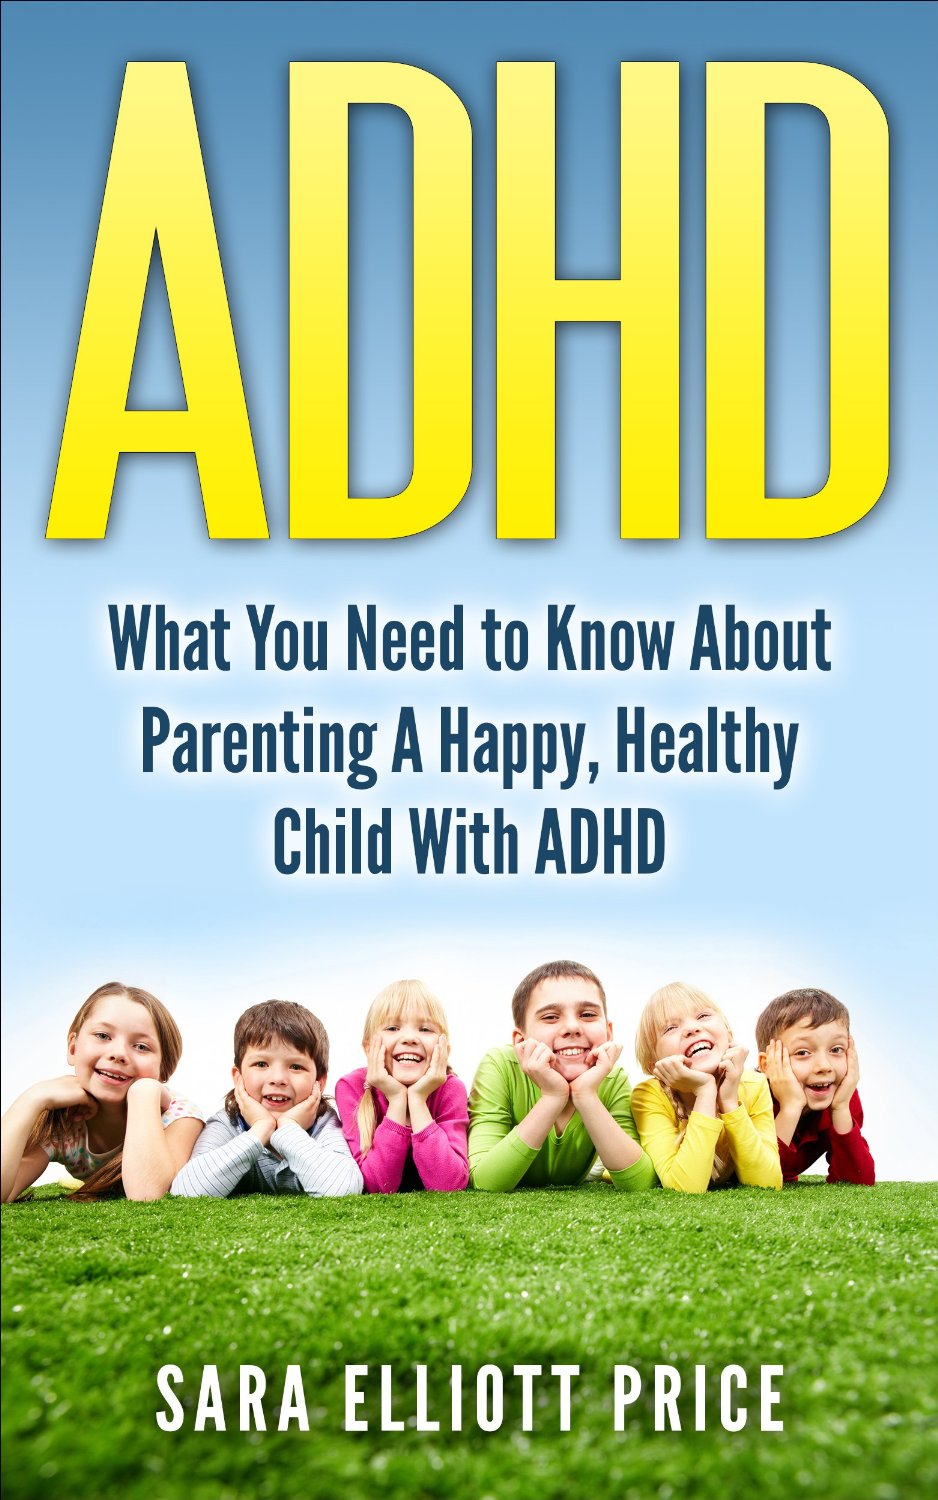 ADHD: What You Need to Know About Parenting A Happy, Healthy Child With ADHD by Sara Elliott Price